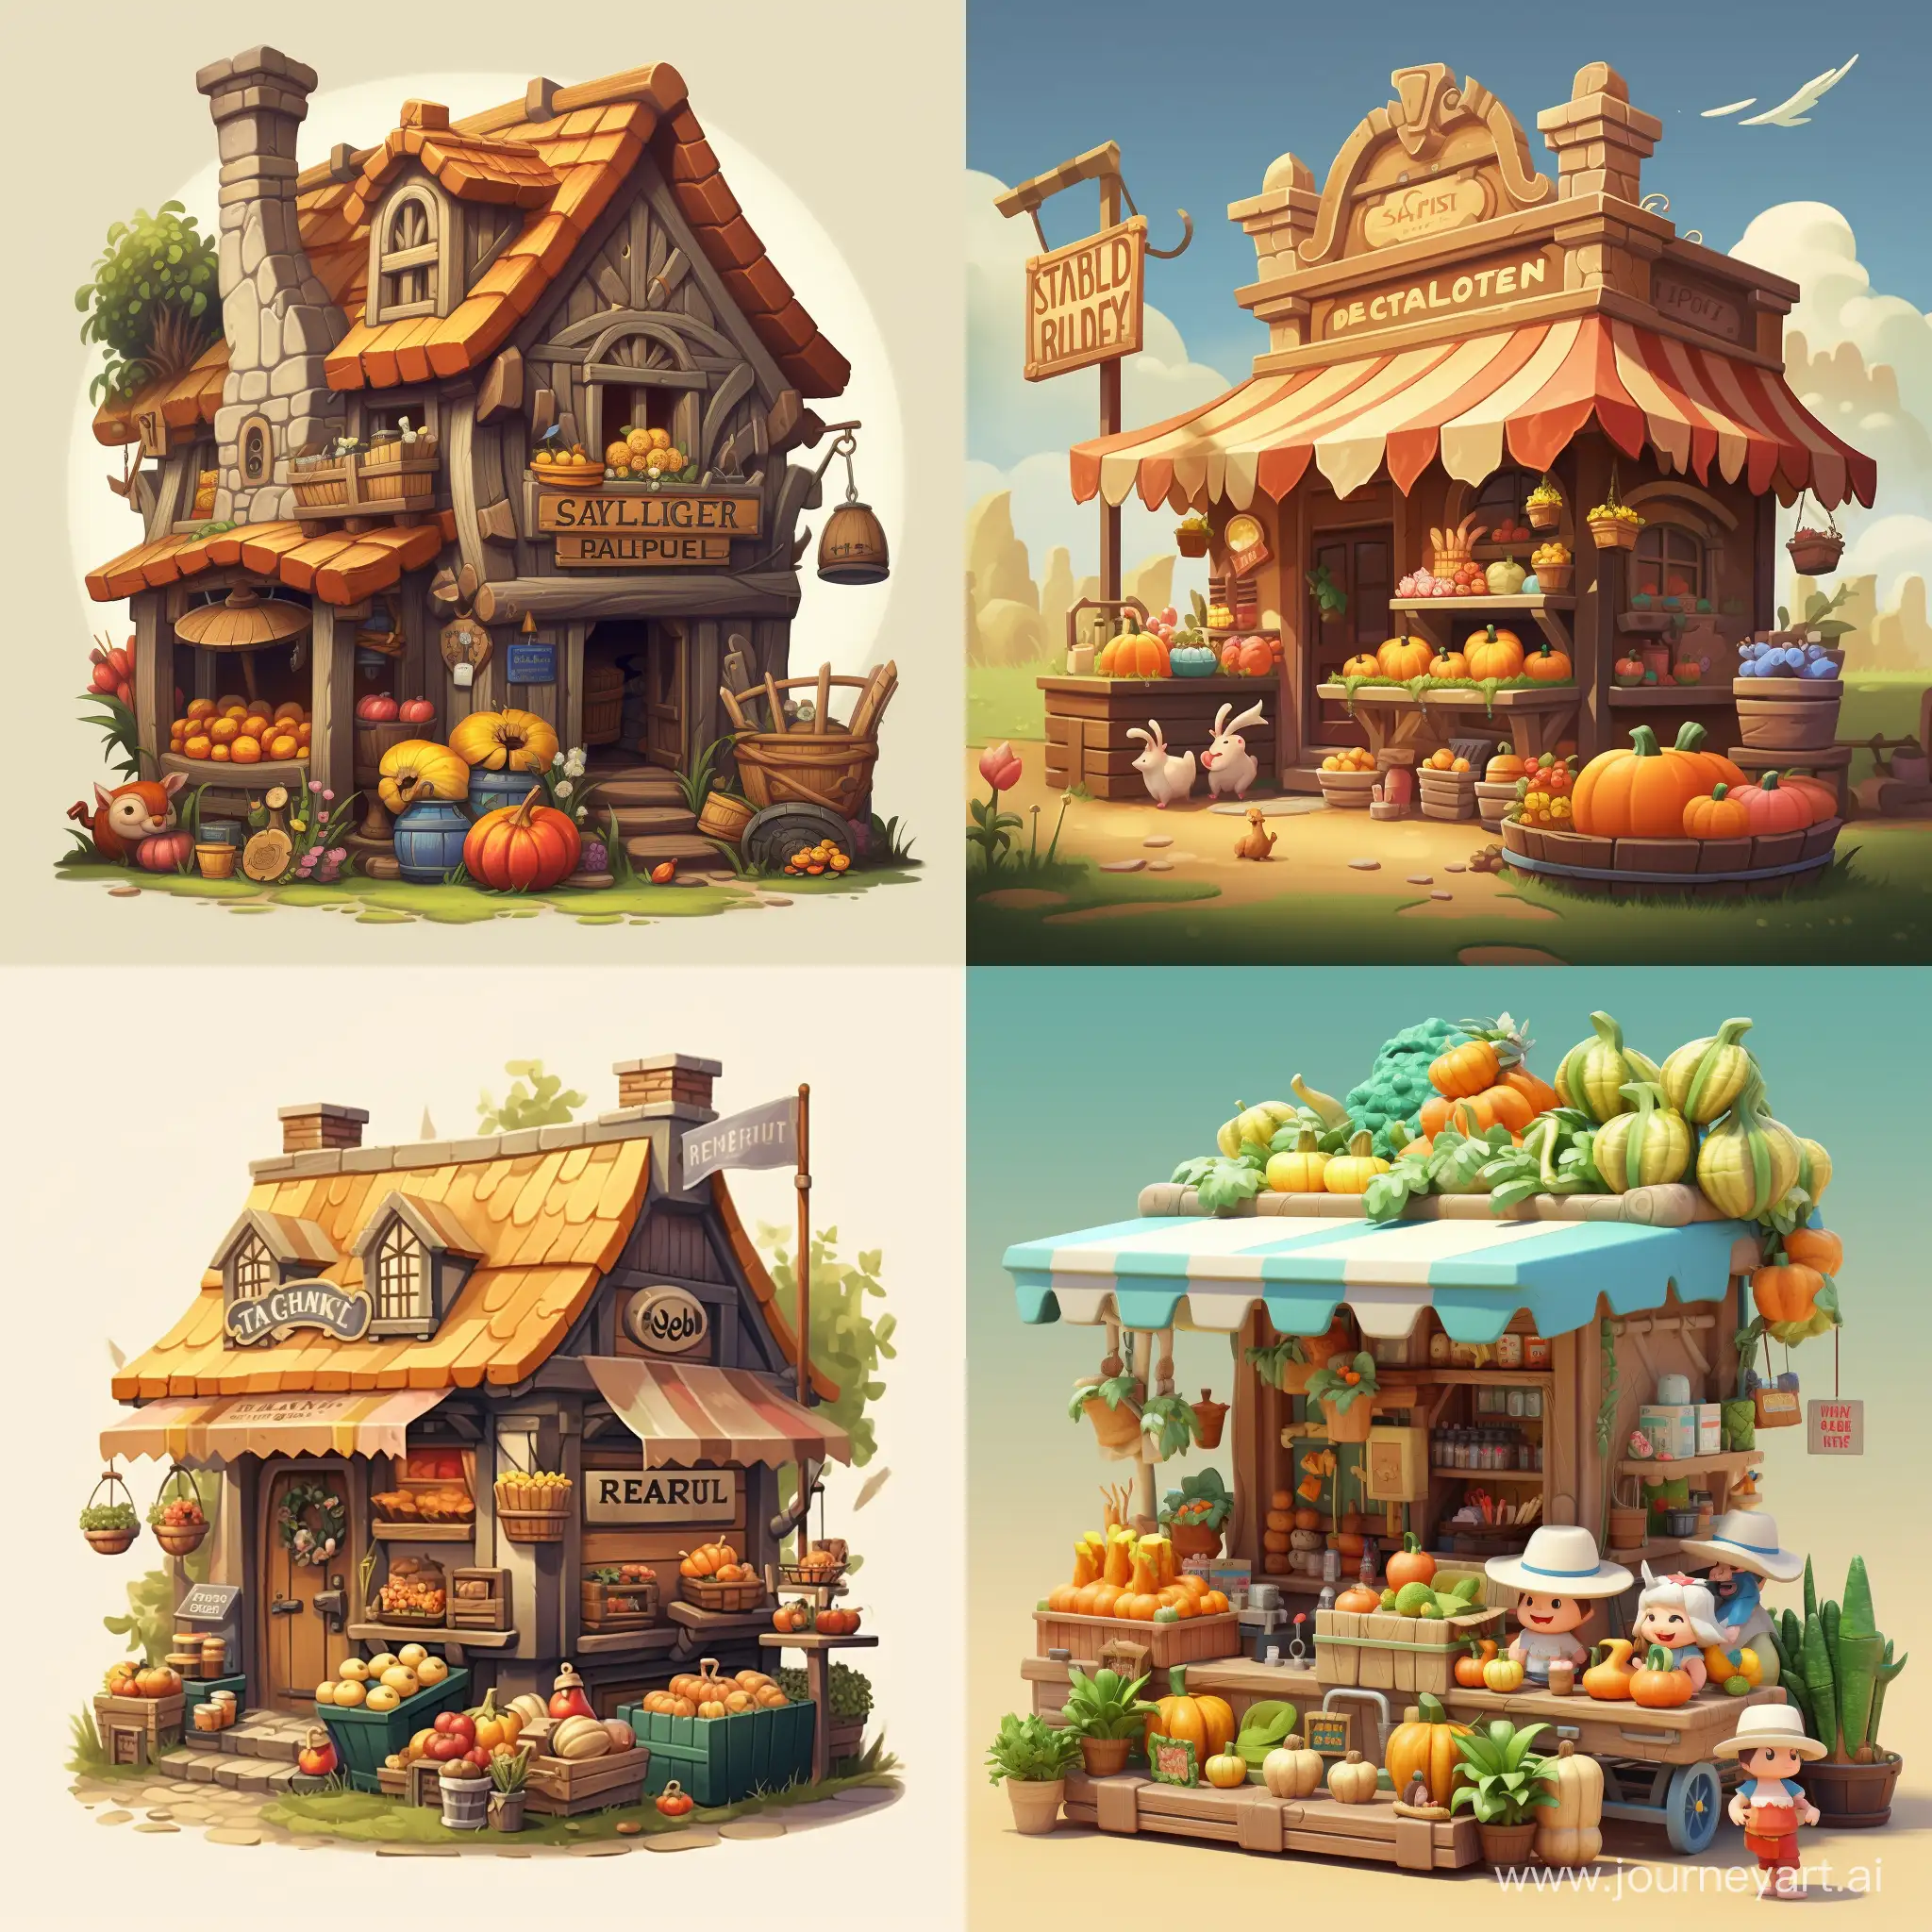 Vibrant-Cartoon-Characters-at-11-Scale-in-Agricultural-Game-Supply-Shop